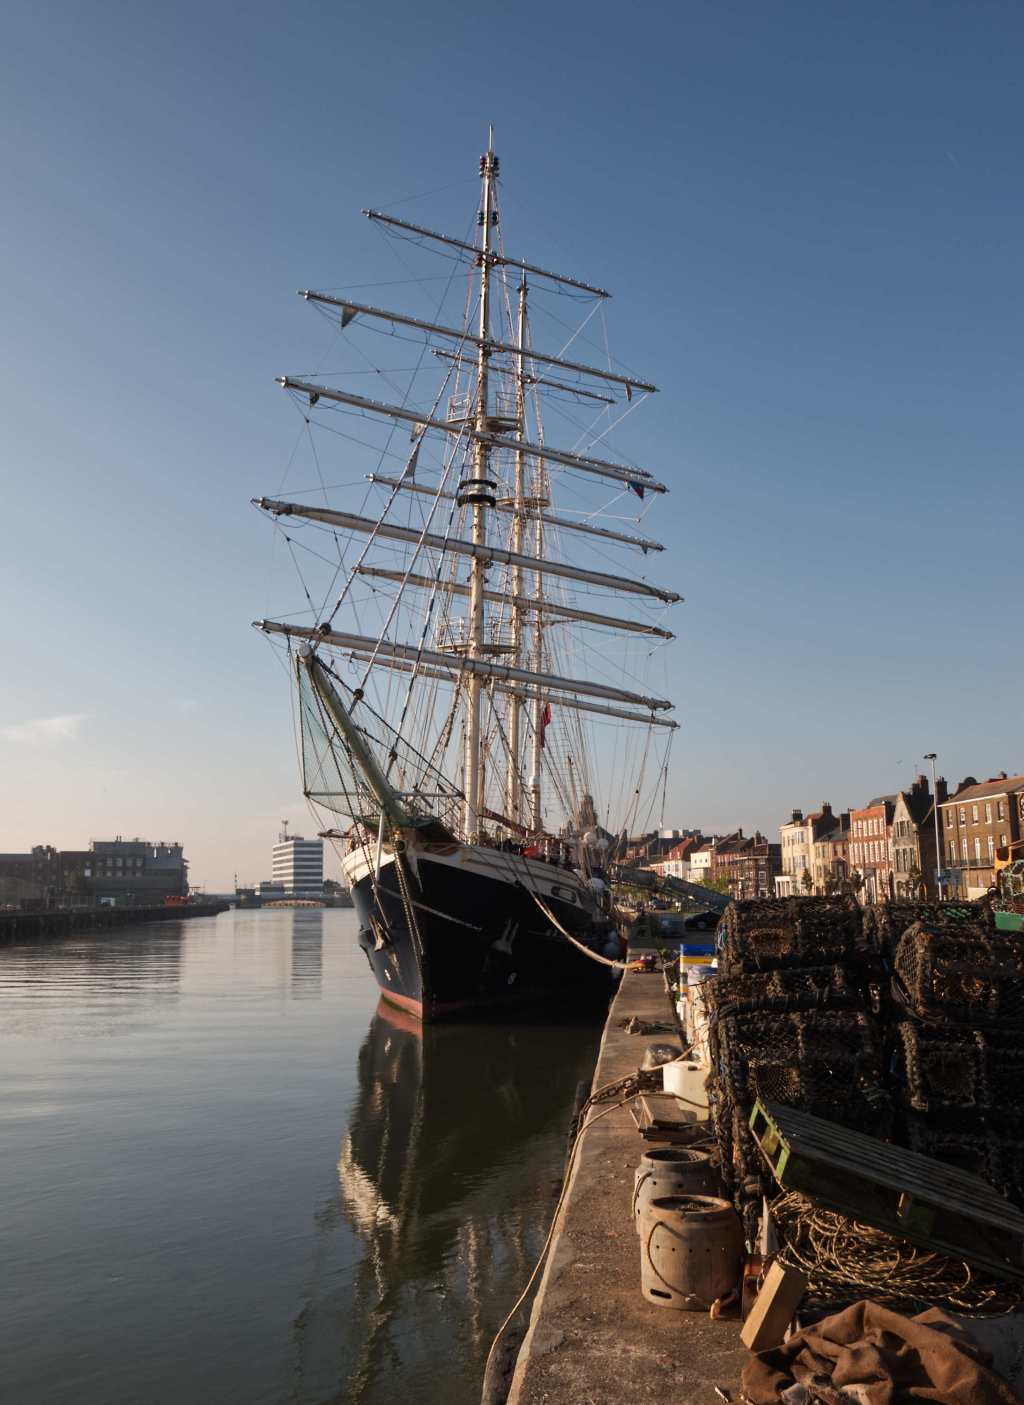 SV Tenacious – Taking a look around a very special Tall Ship